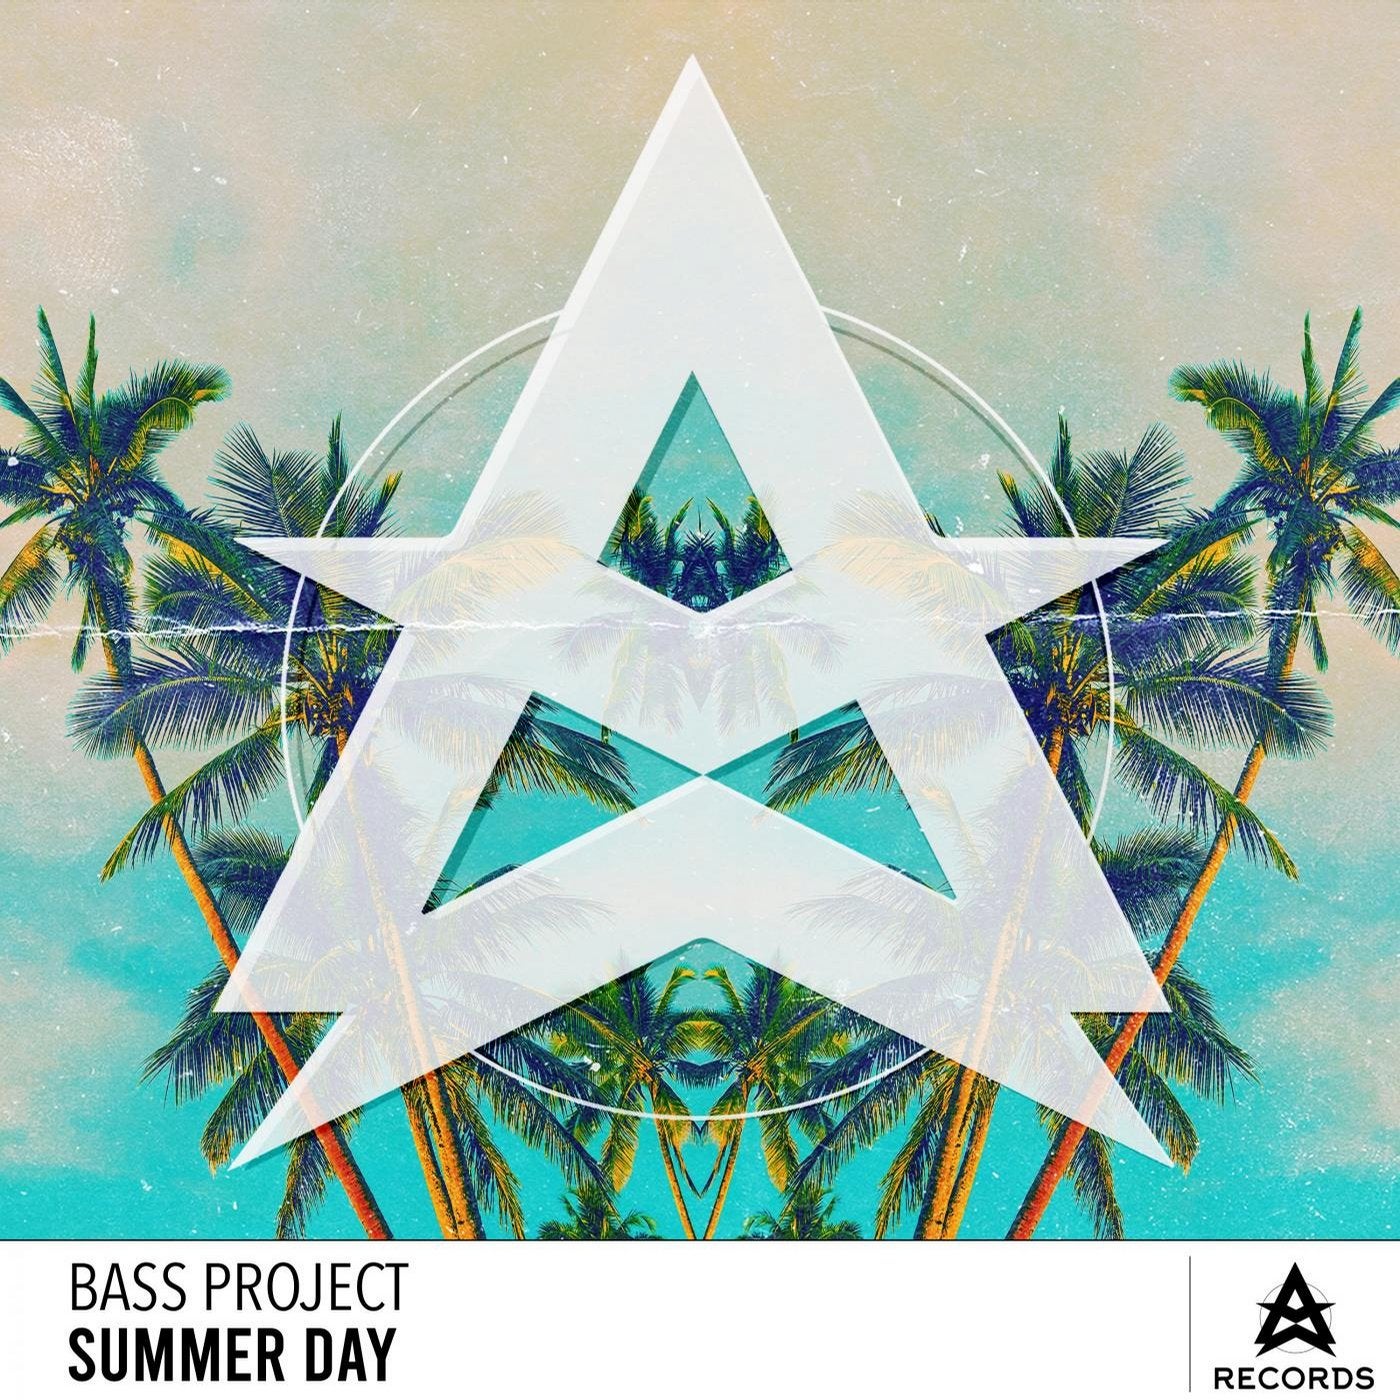 Bass project